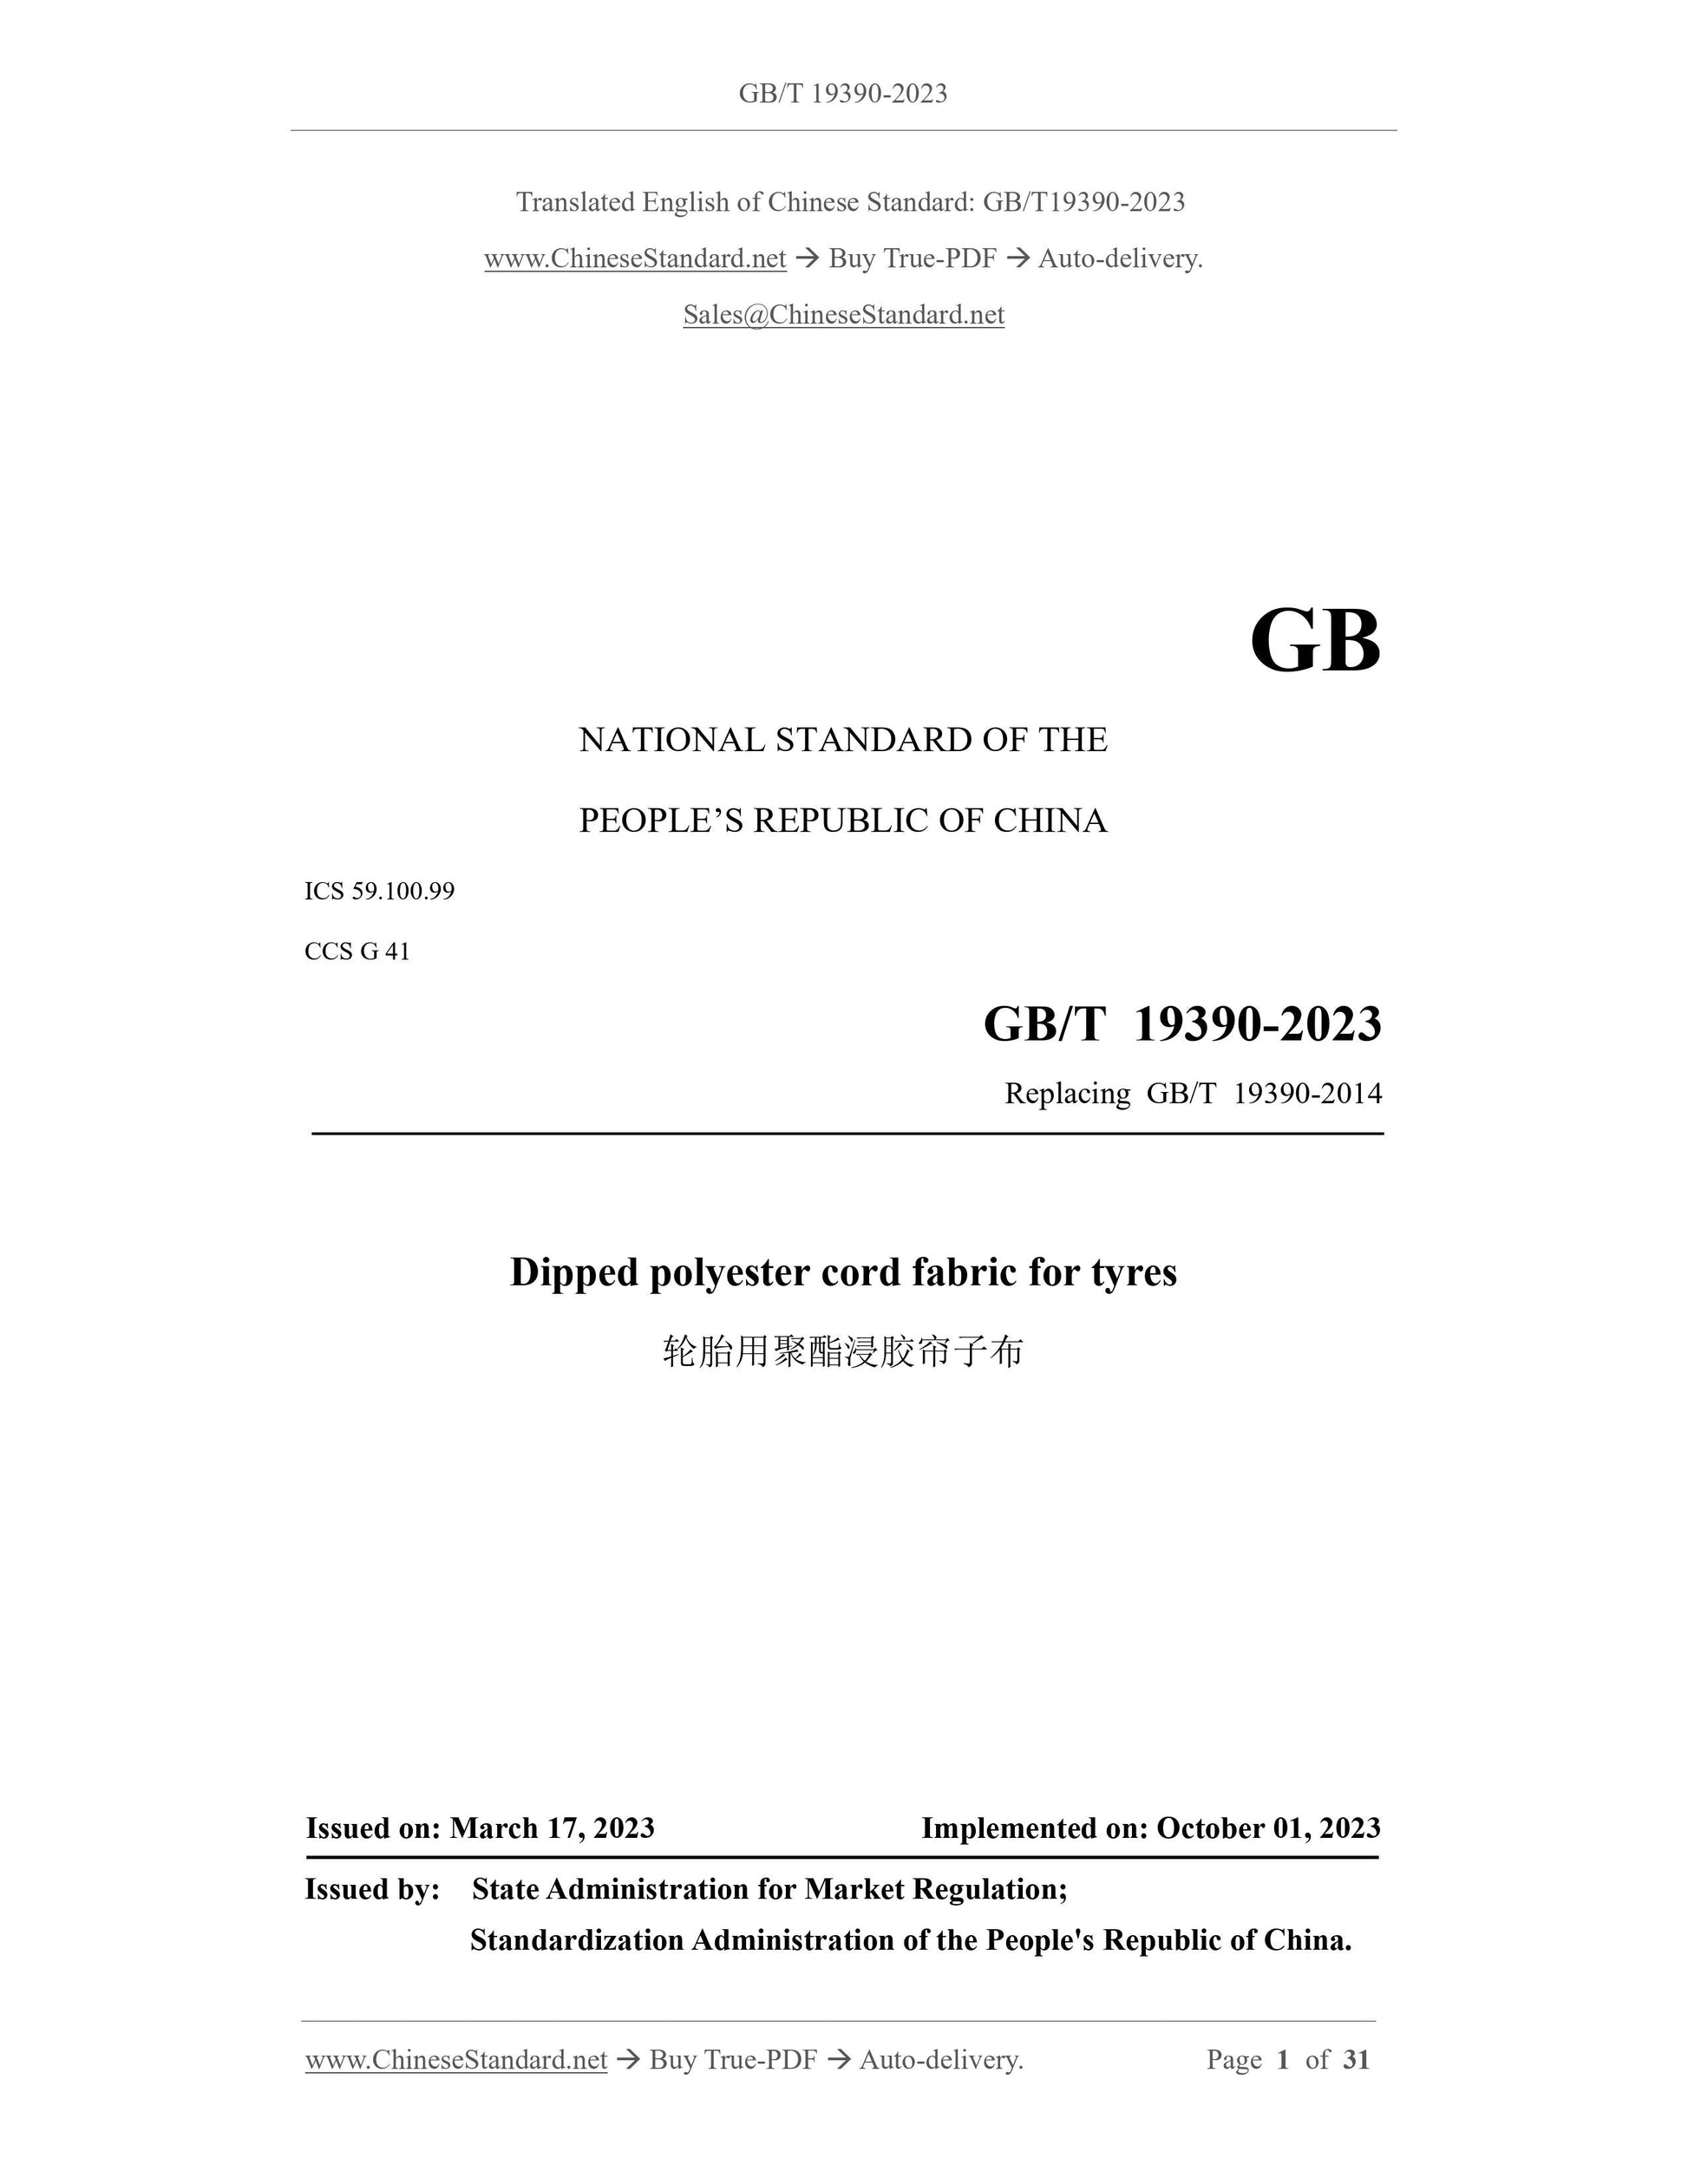 GB/T 19390-2023 Page 1